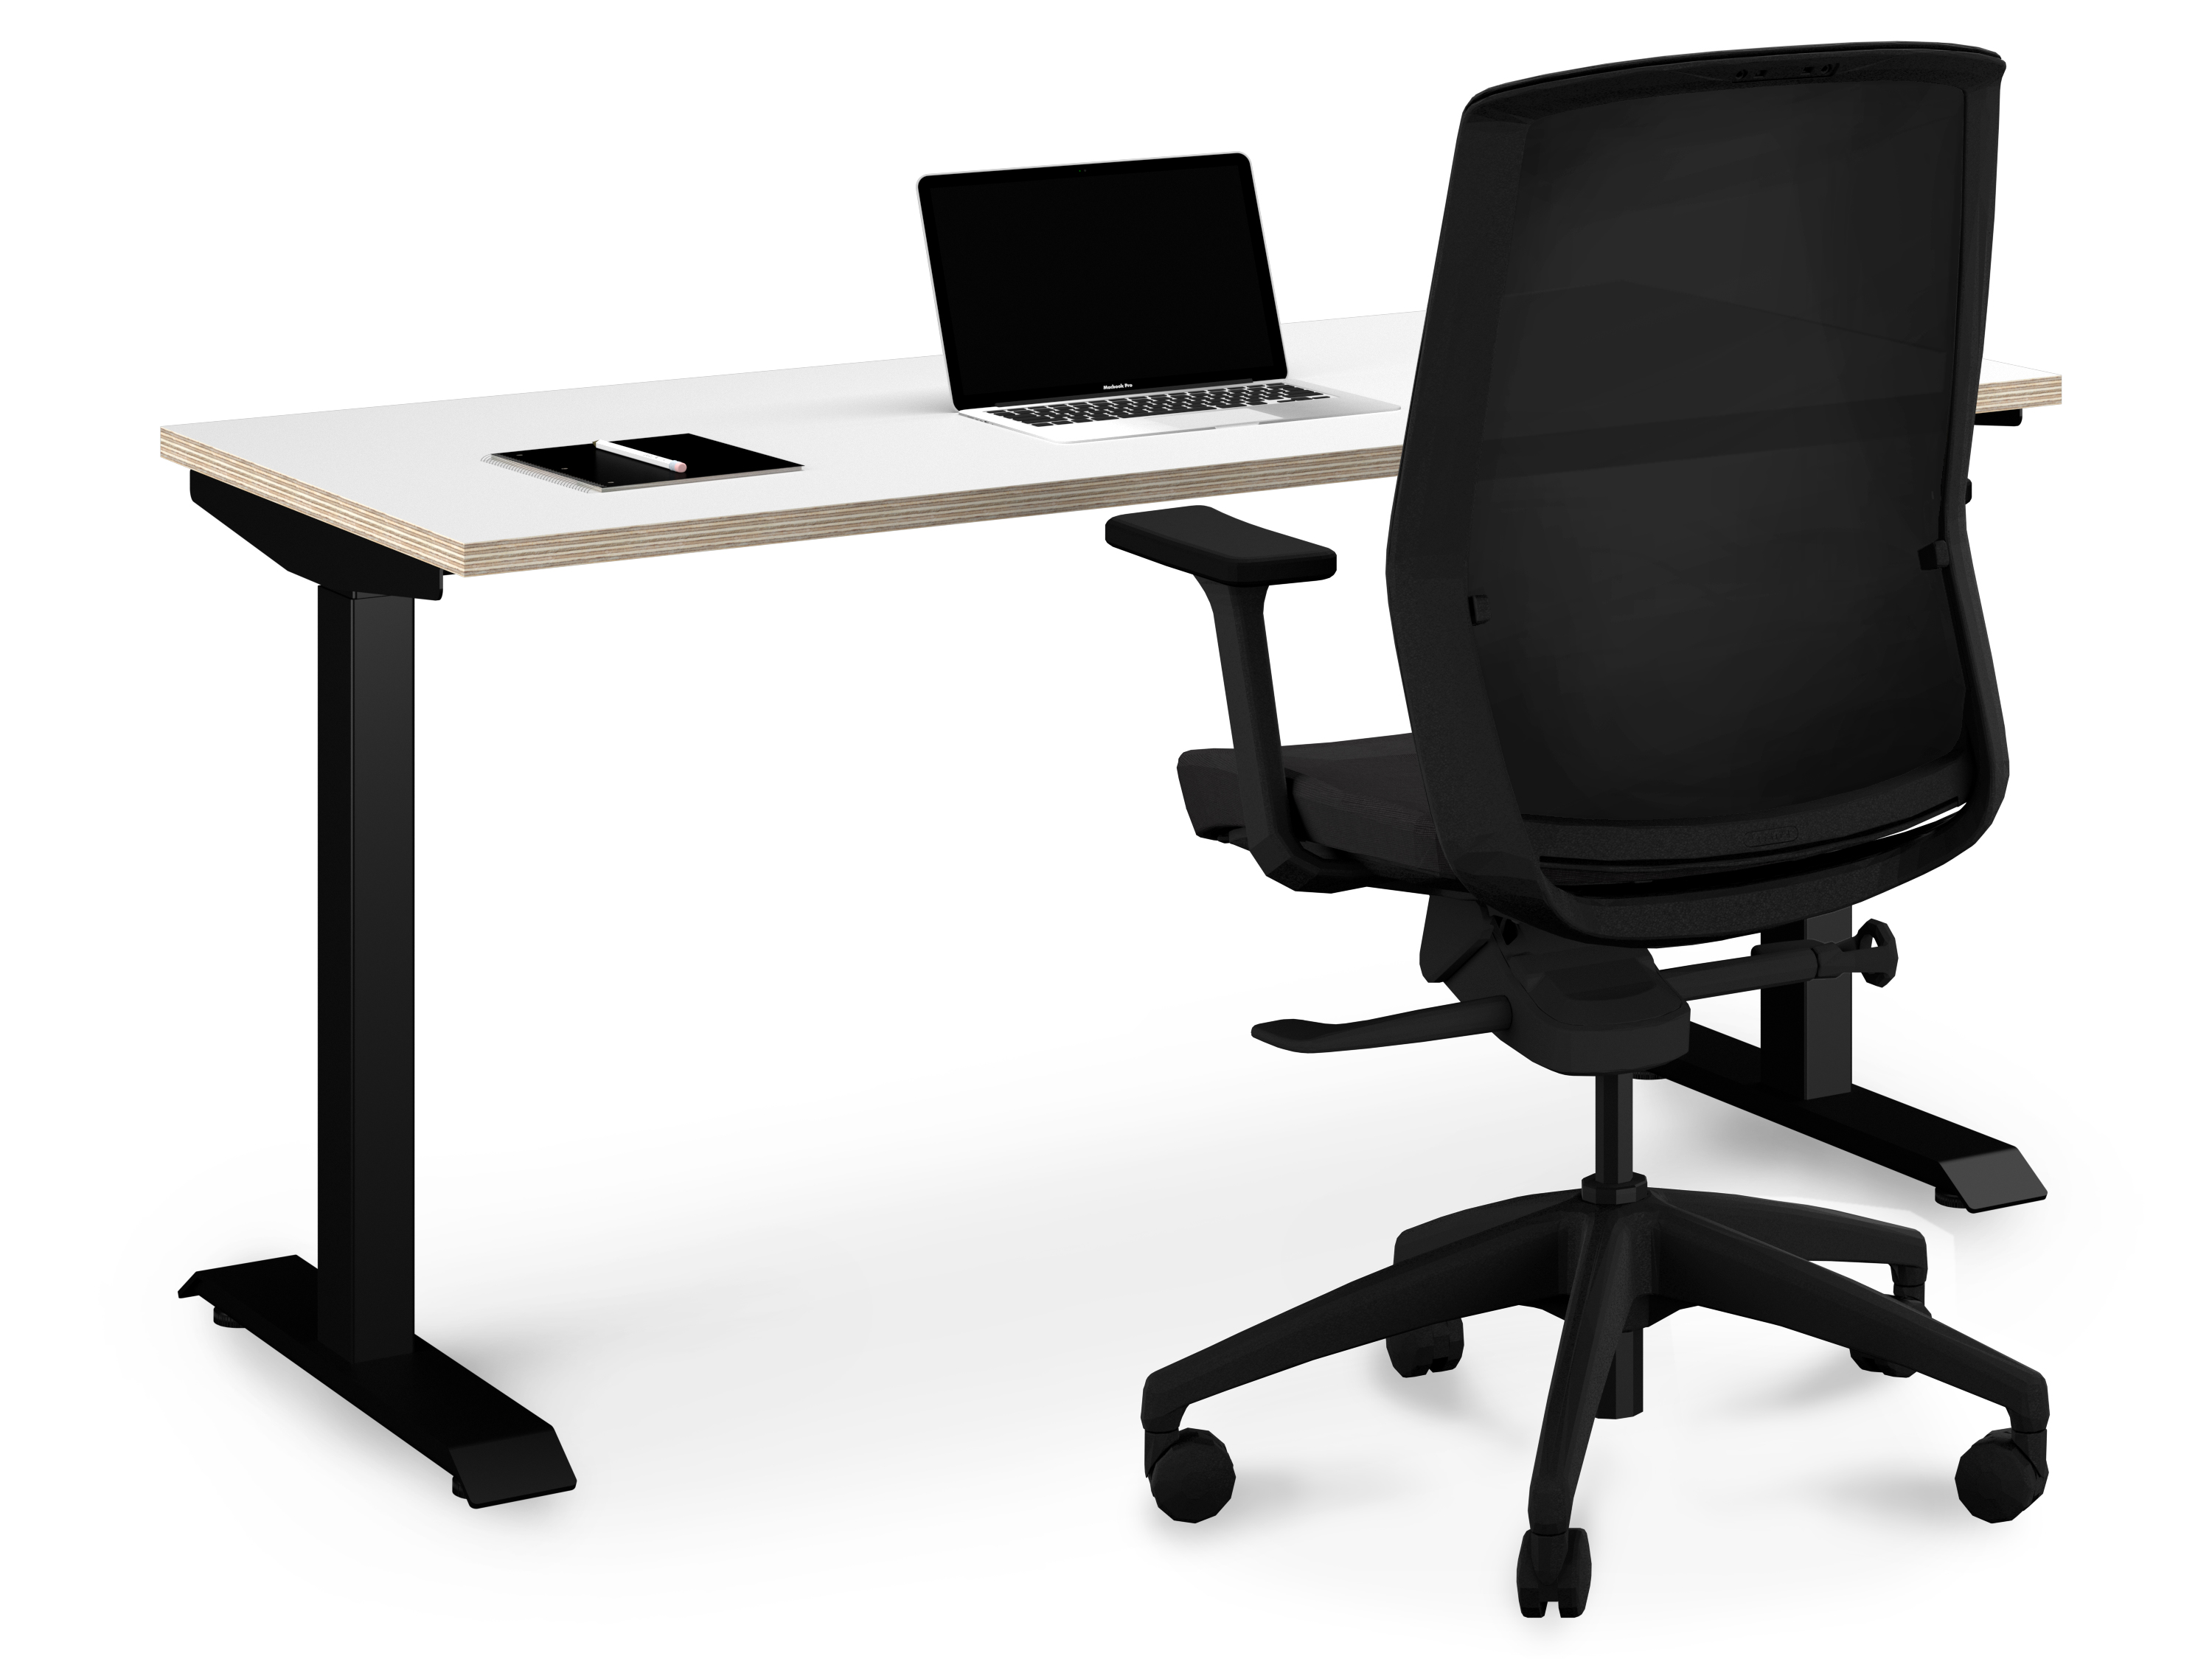 WS - Sit Stand Solo - Black Frame, White ply edging (Dressed J1)